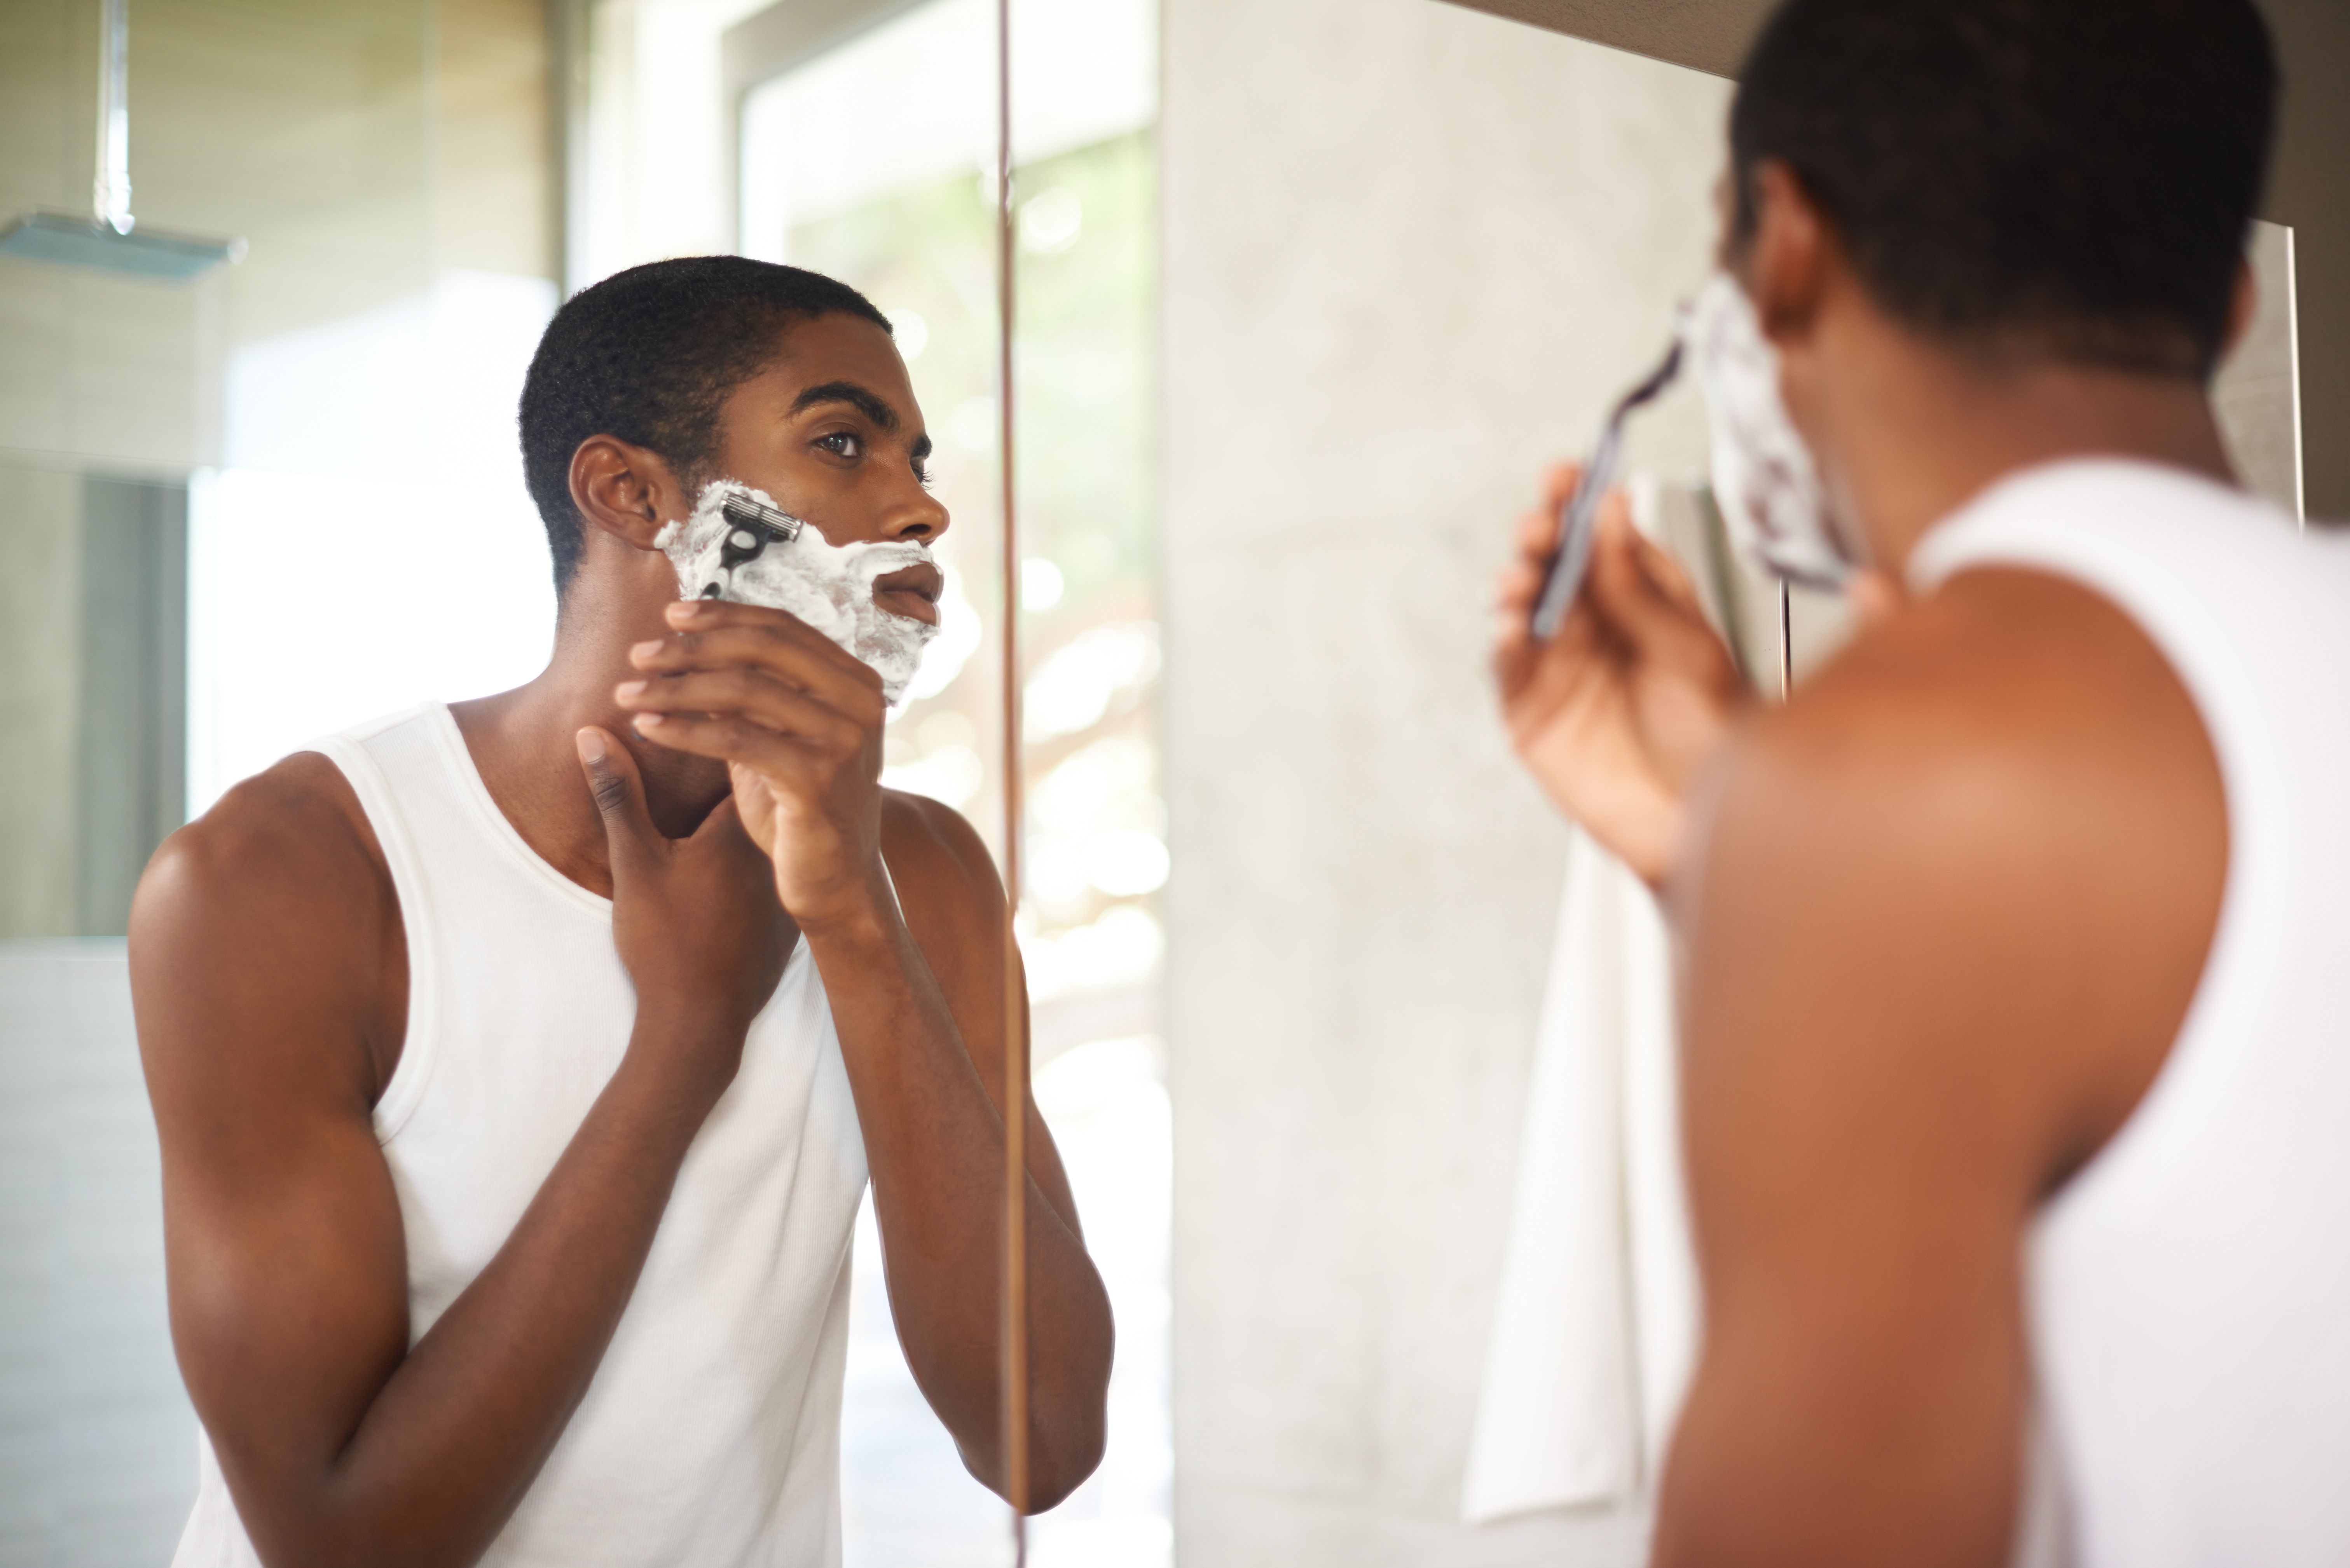 How to Prevent and Treat Razor Burn